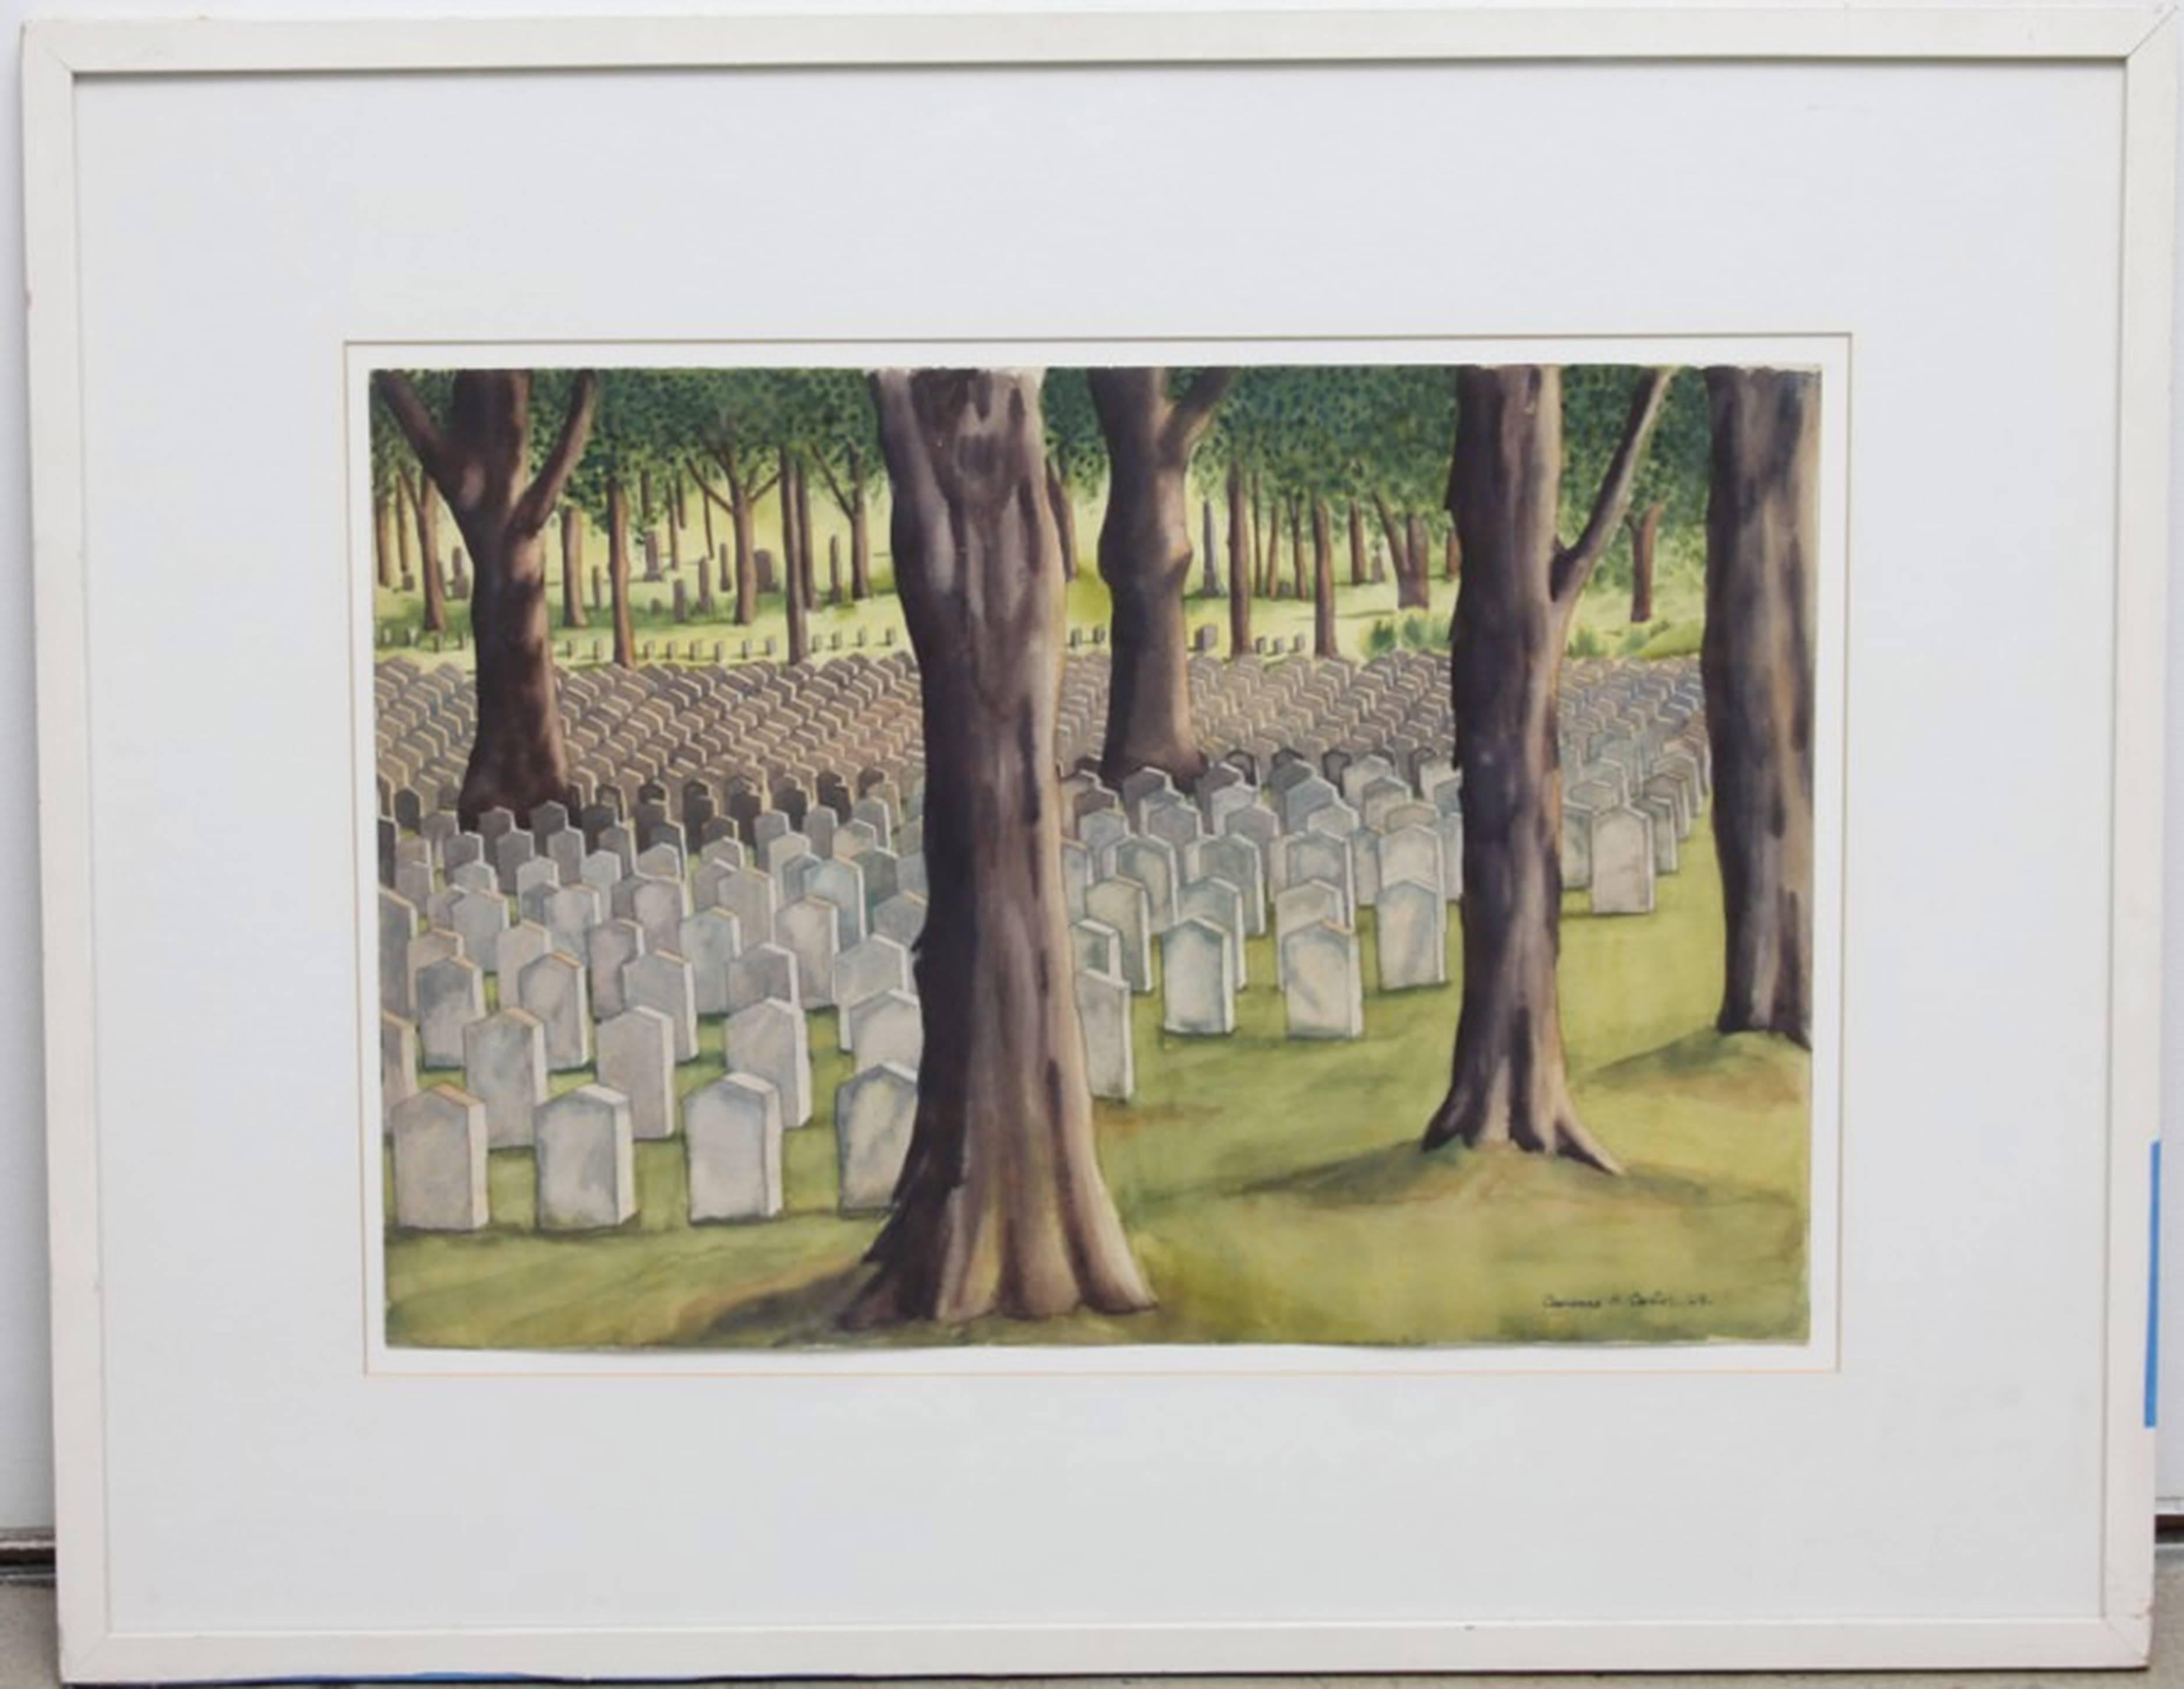 Confeferate Soldiers' Cemetery, 1929 - Art by Clarence Holbrook Carter